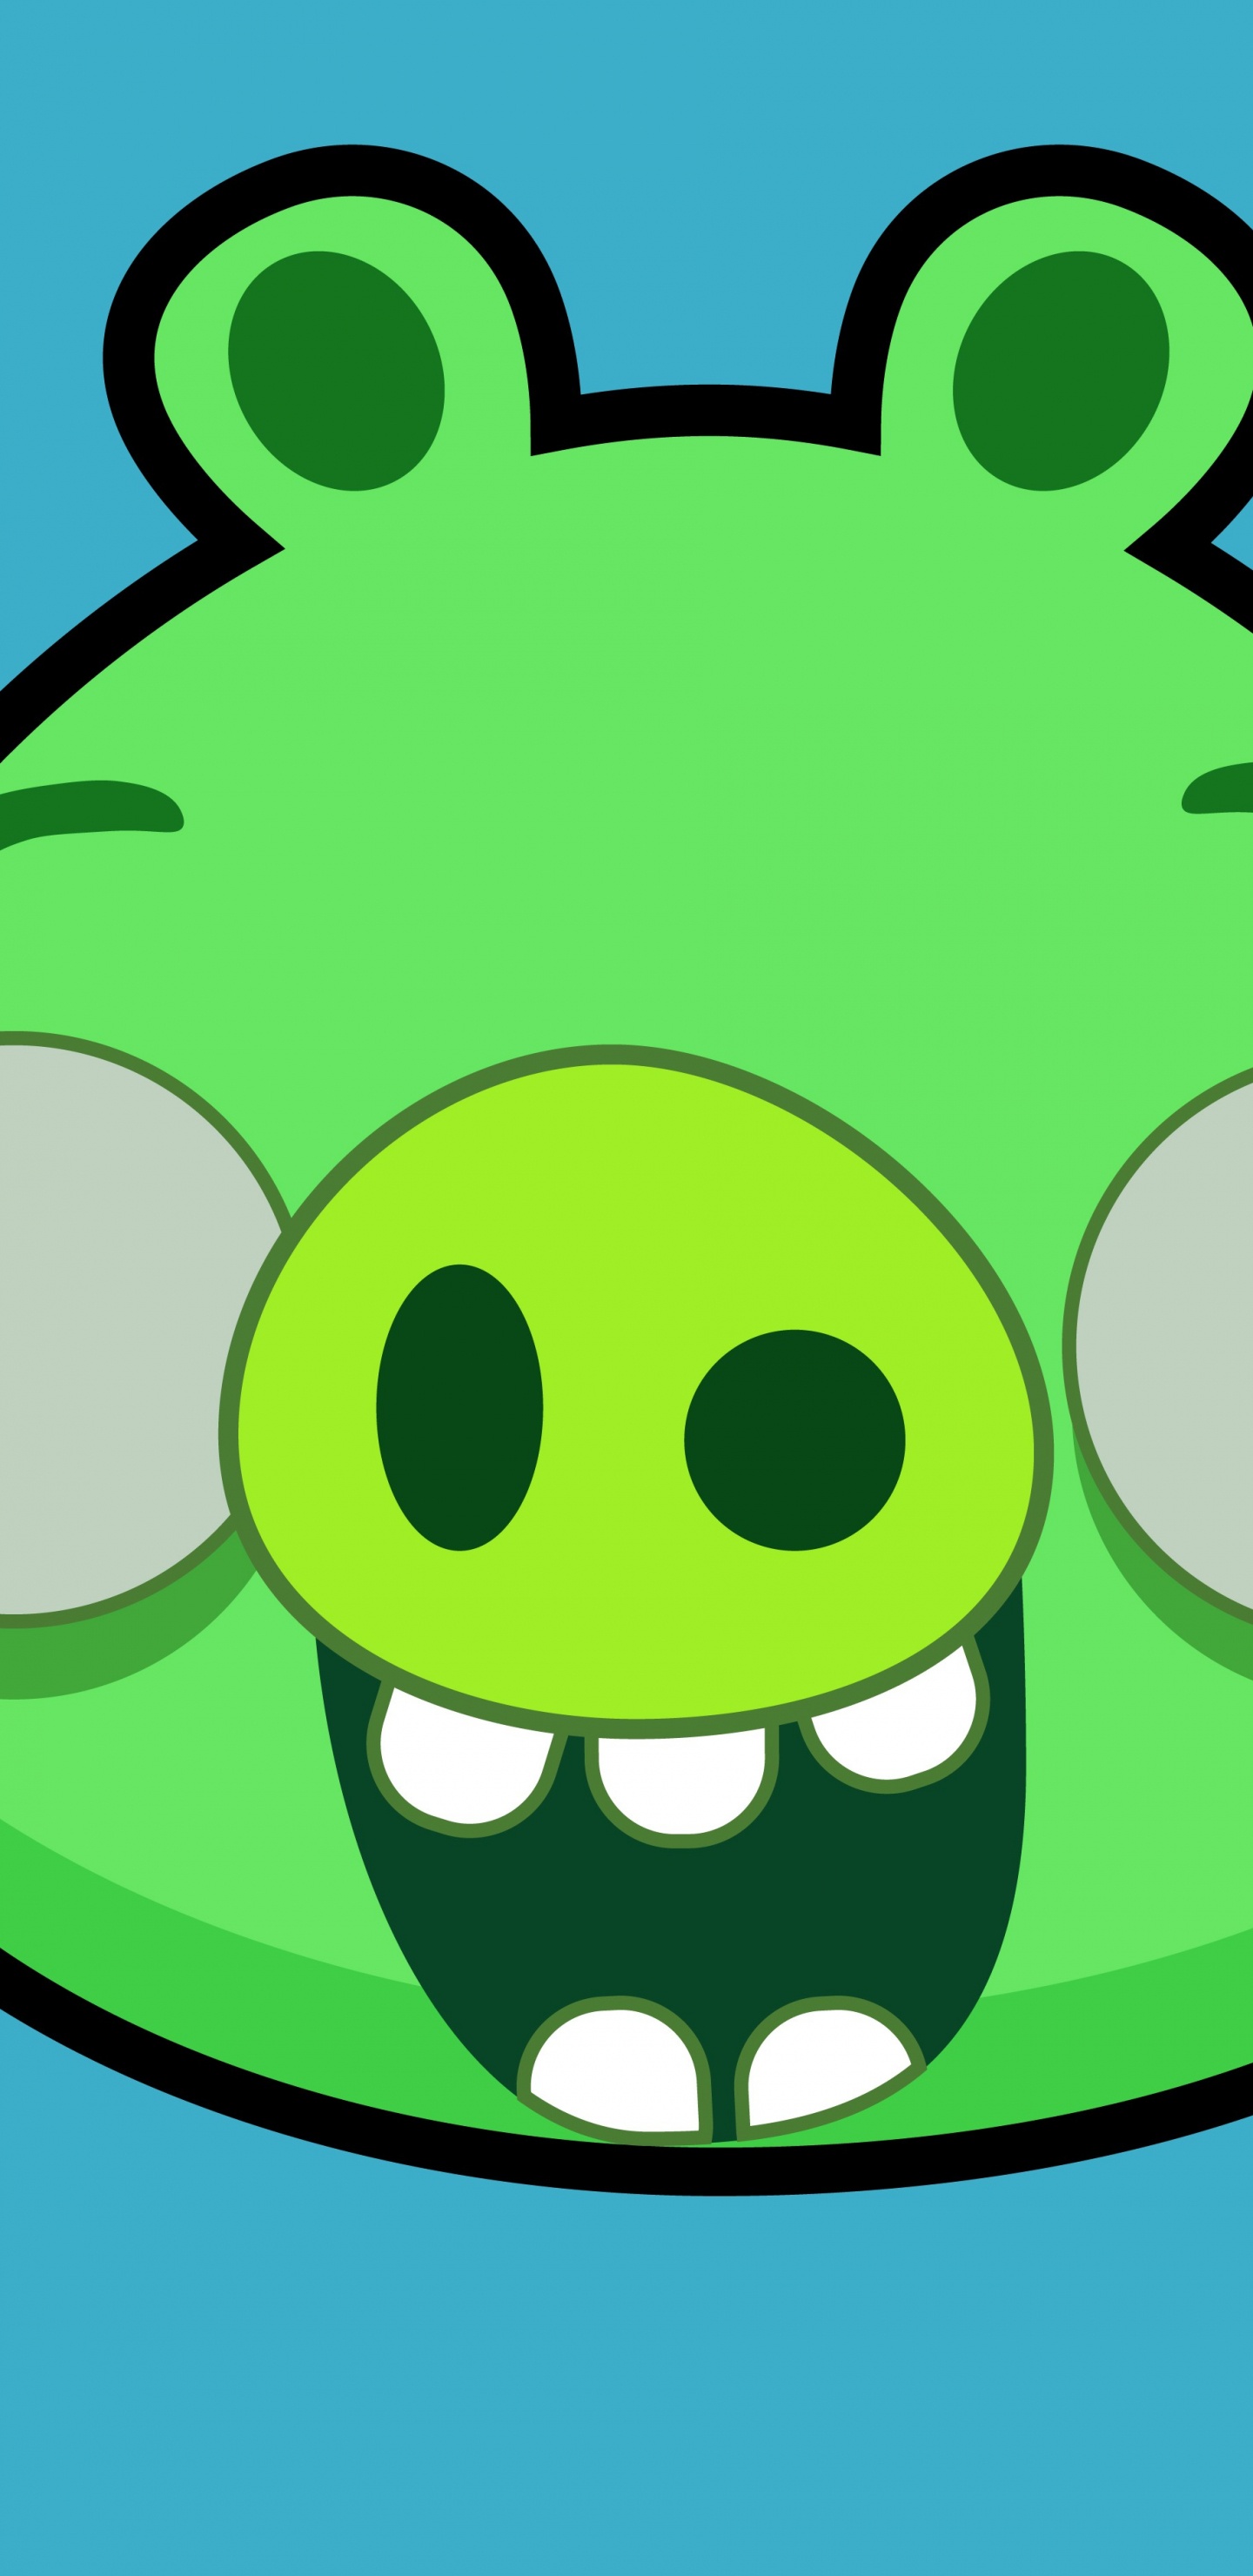 Angry Birds, Green, Cartoon, Smile, Illustration. Wallpaper in 1440x2960 Resolution